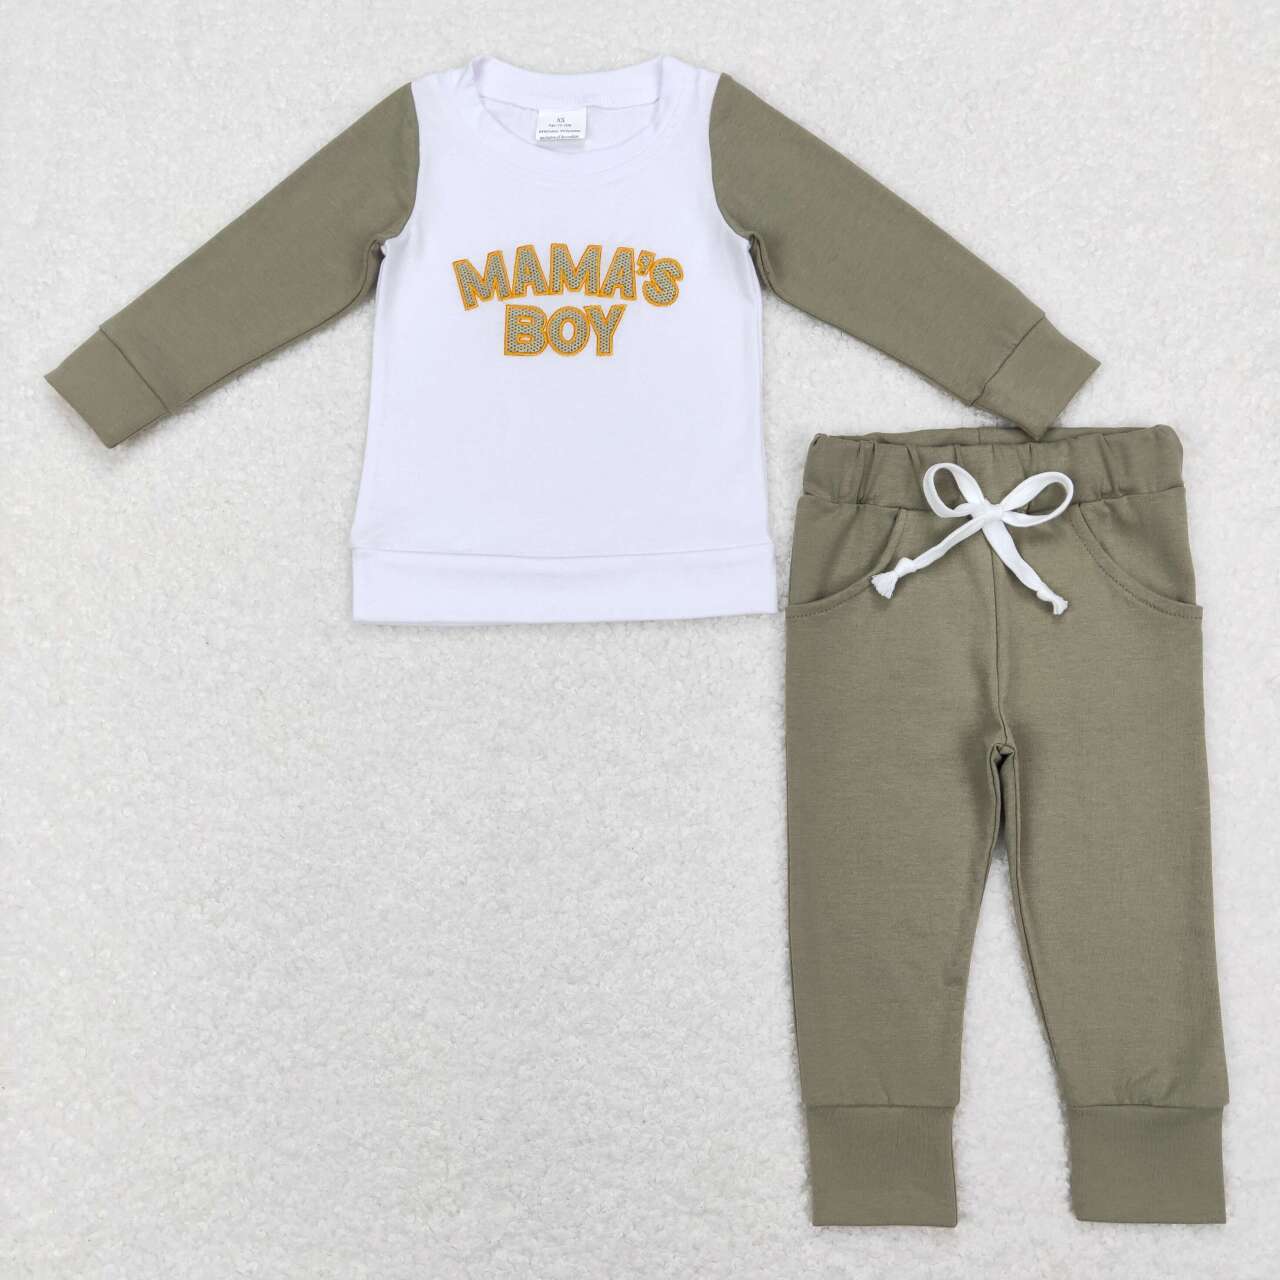 BLP0435 mama's boy embroidered lettering white raglan long sleeve army green trousers suit